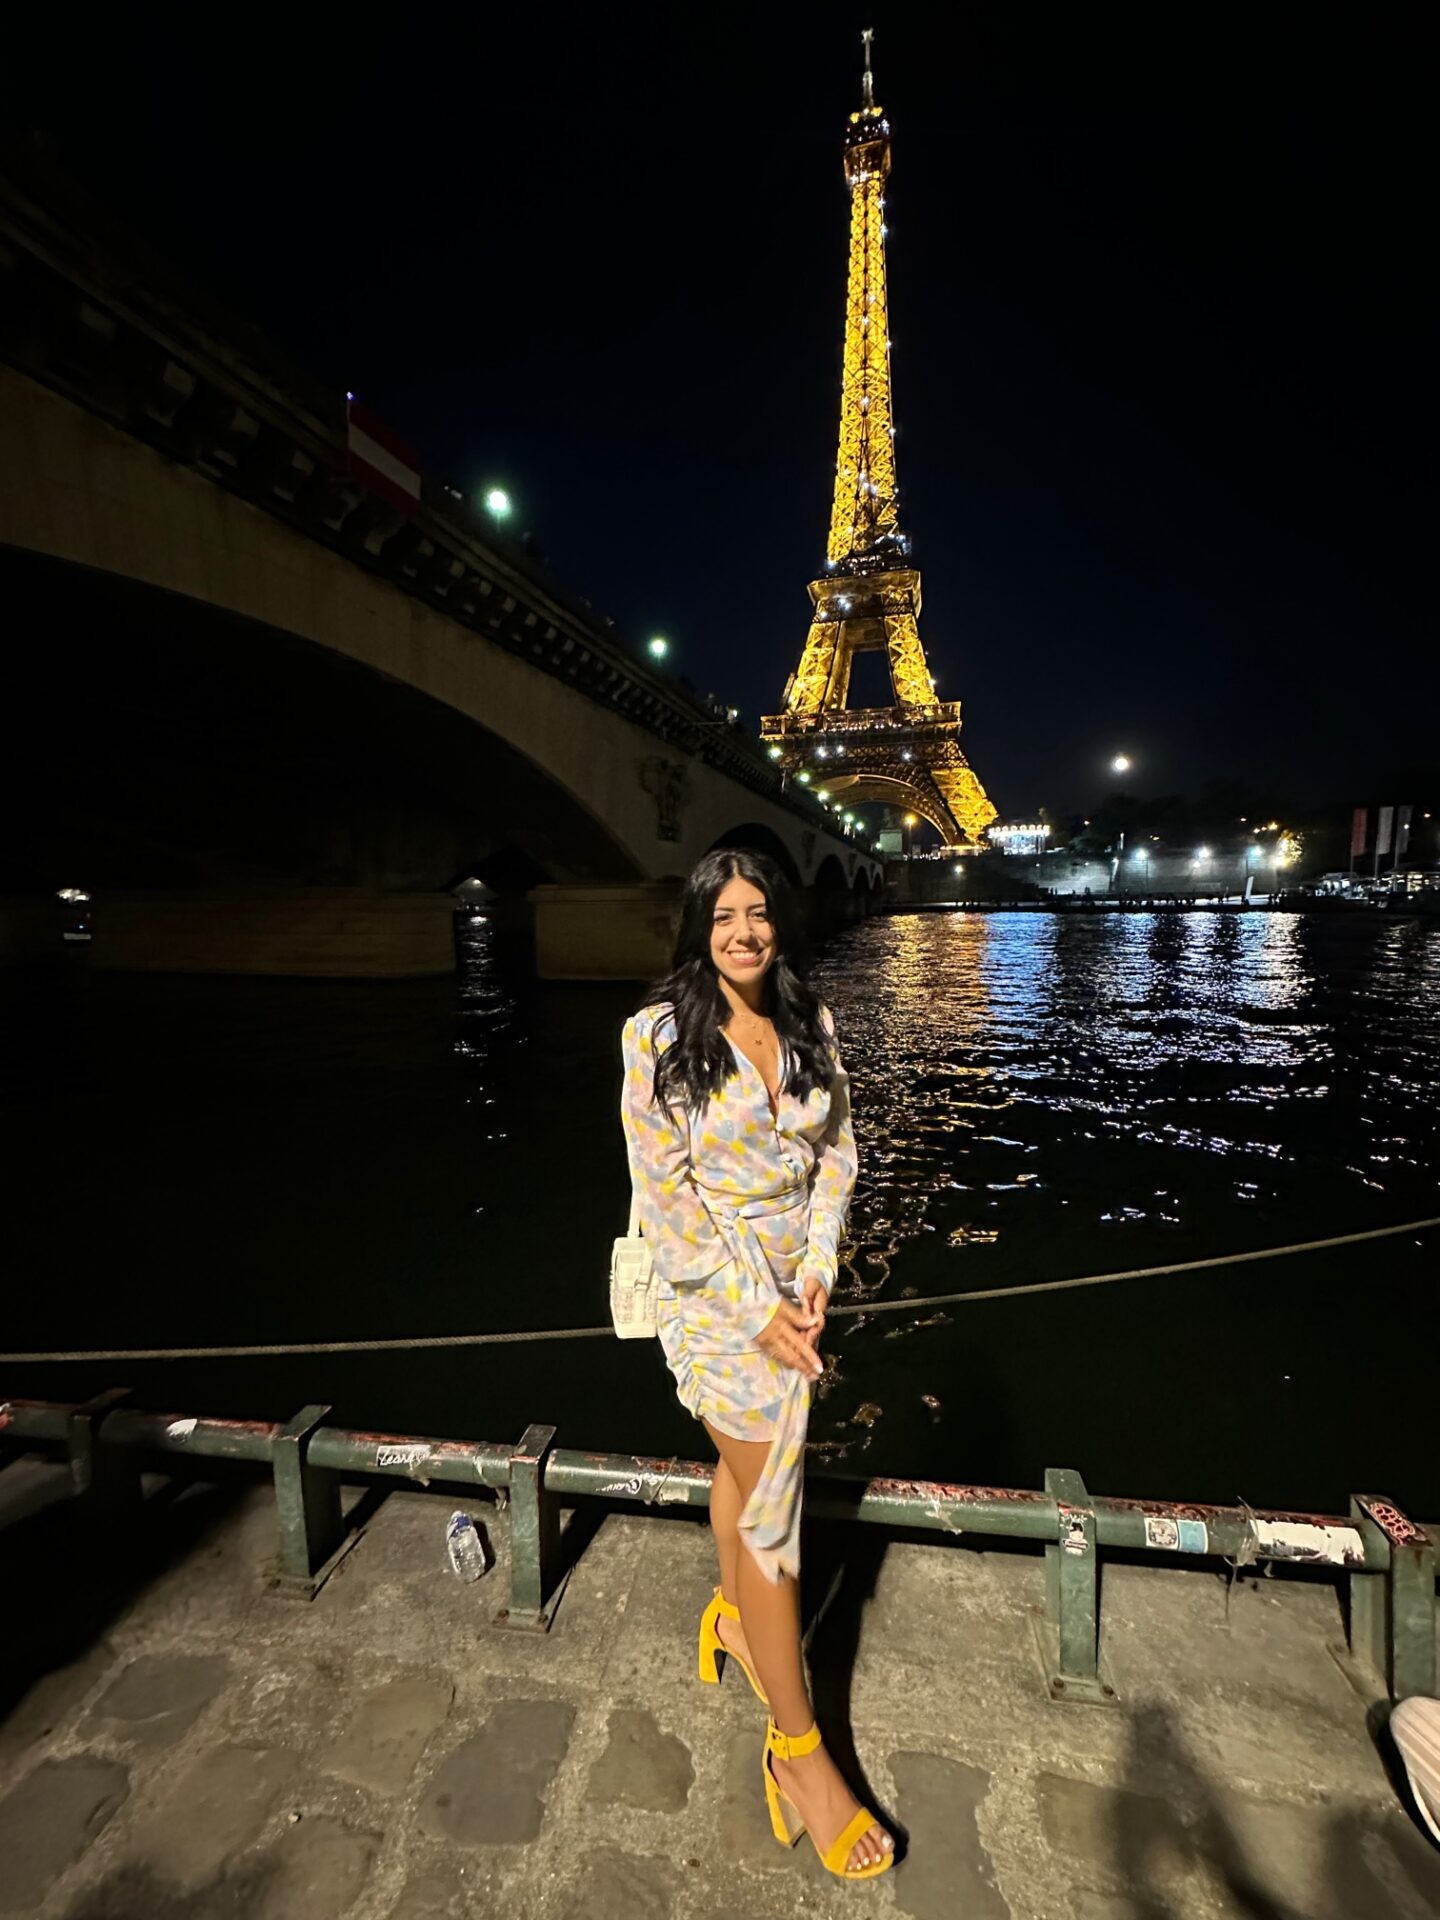 THINGS TO DO IN THE CITY OF LIGHTS: PARIS